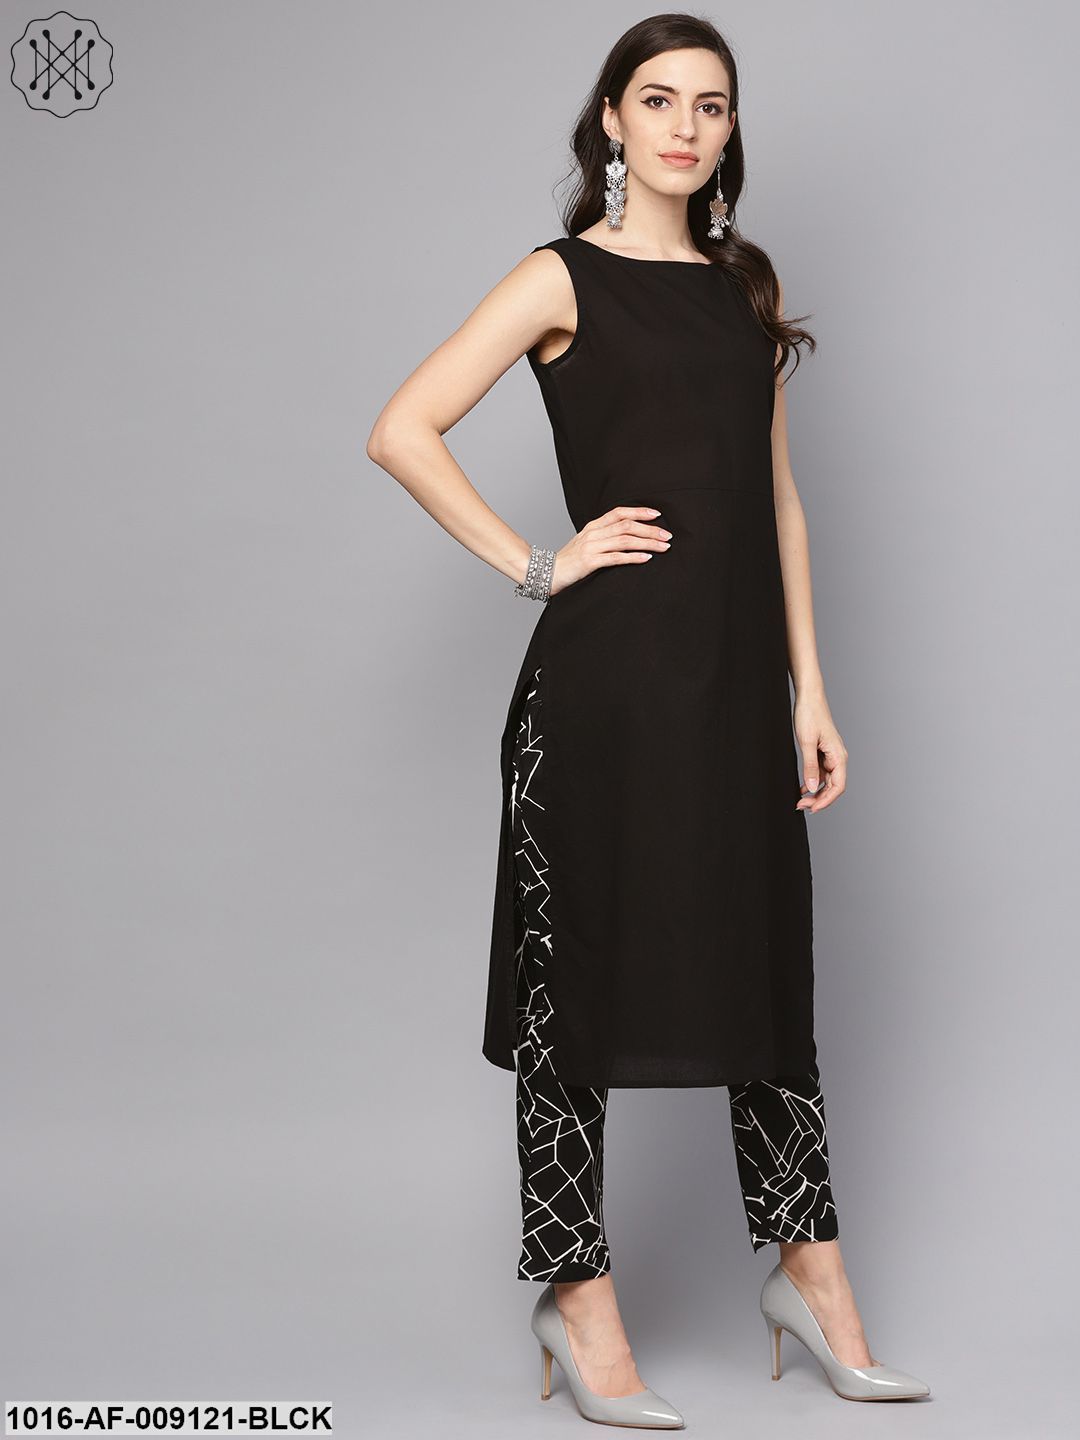 Twara black Chinese collar & 3/4th sleeve rayon A-line kurti digital  printed with different color stripes